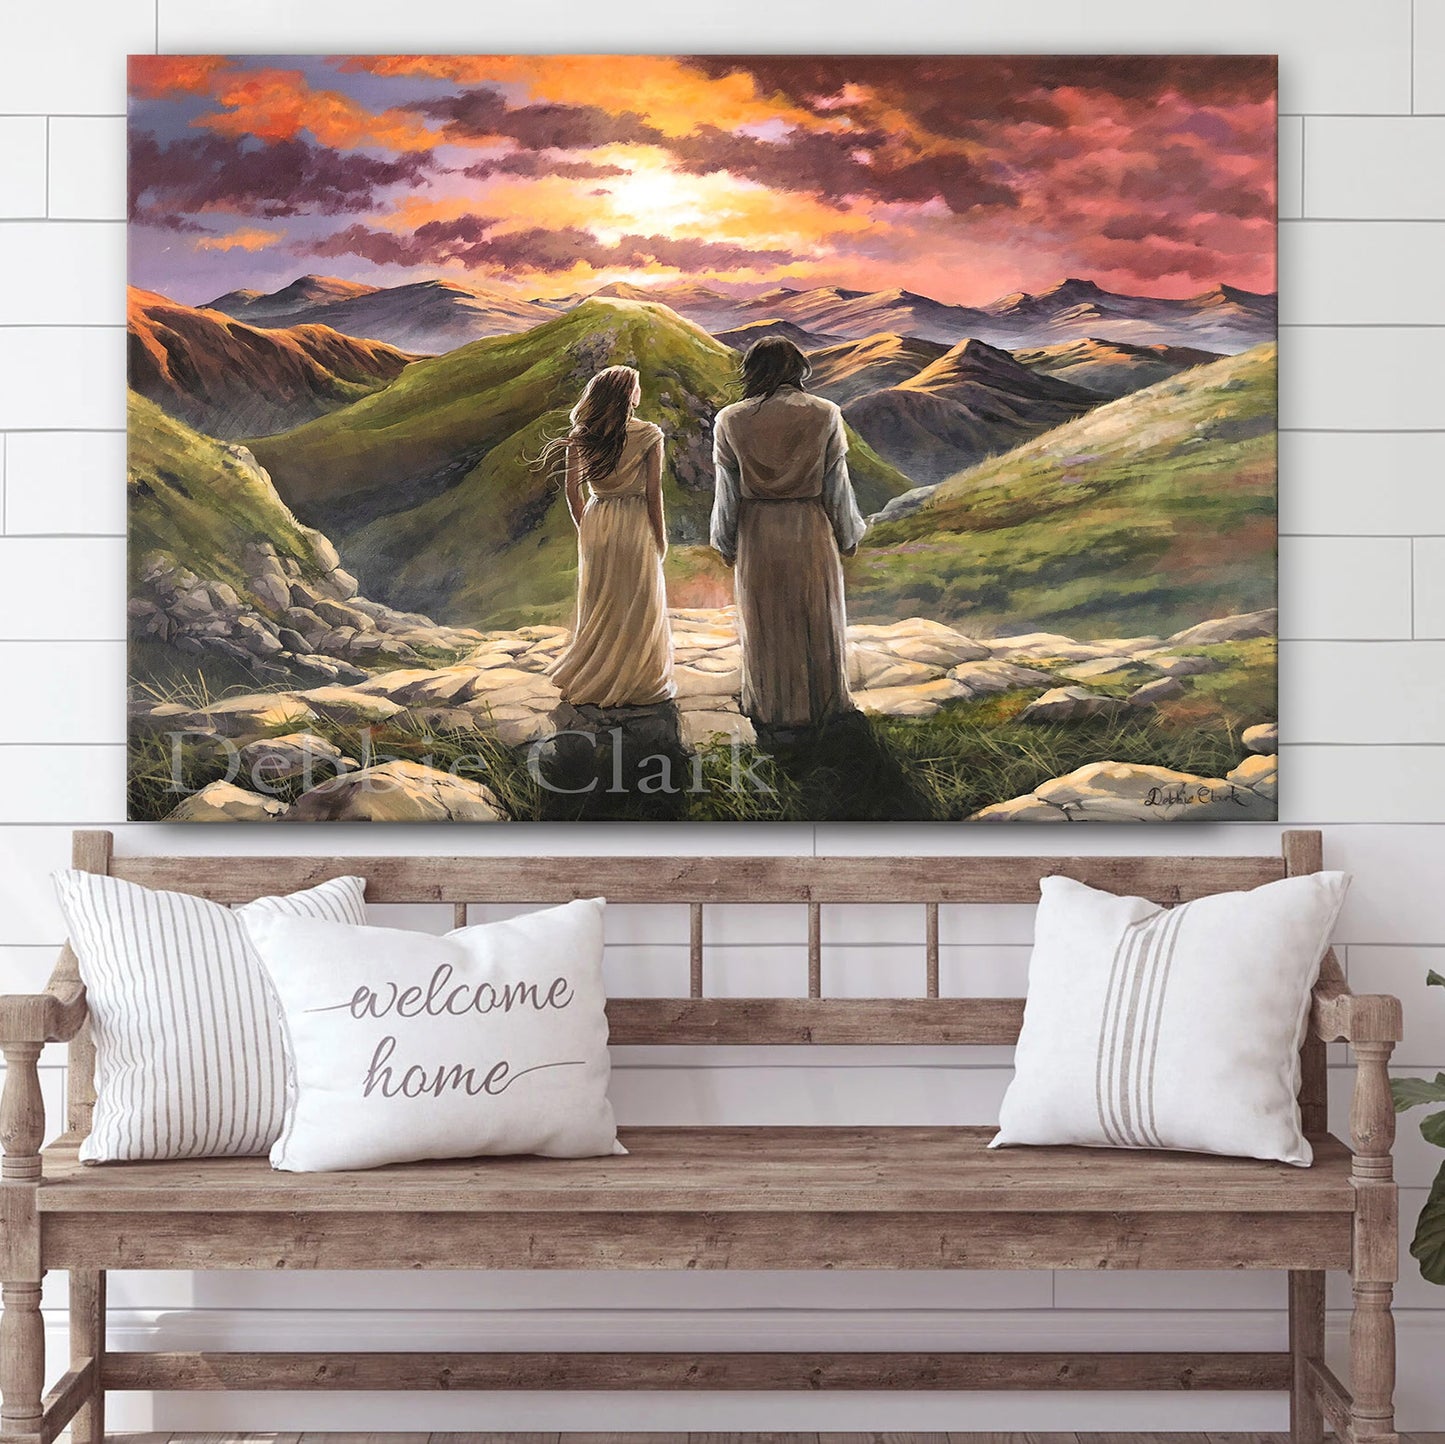 Take Heart Christian Art Limited - Canvas Pictures - Jesus Canvas Art - Christian Wall Art